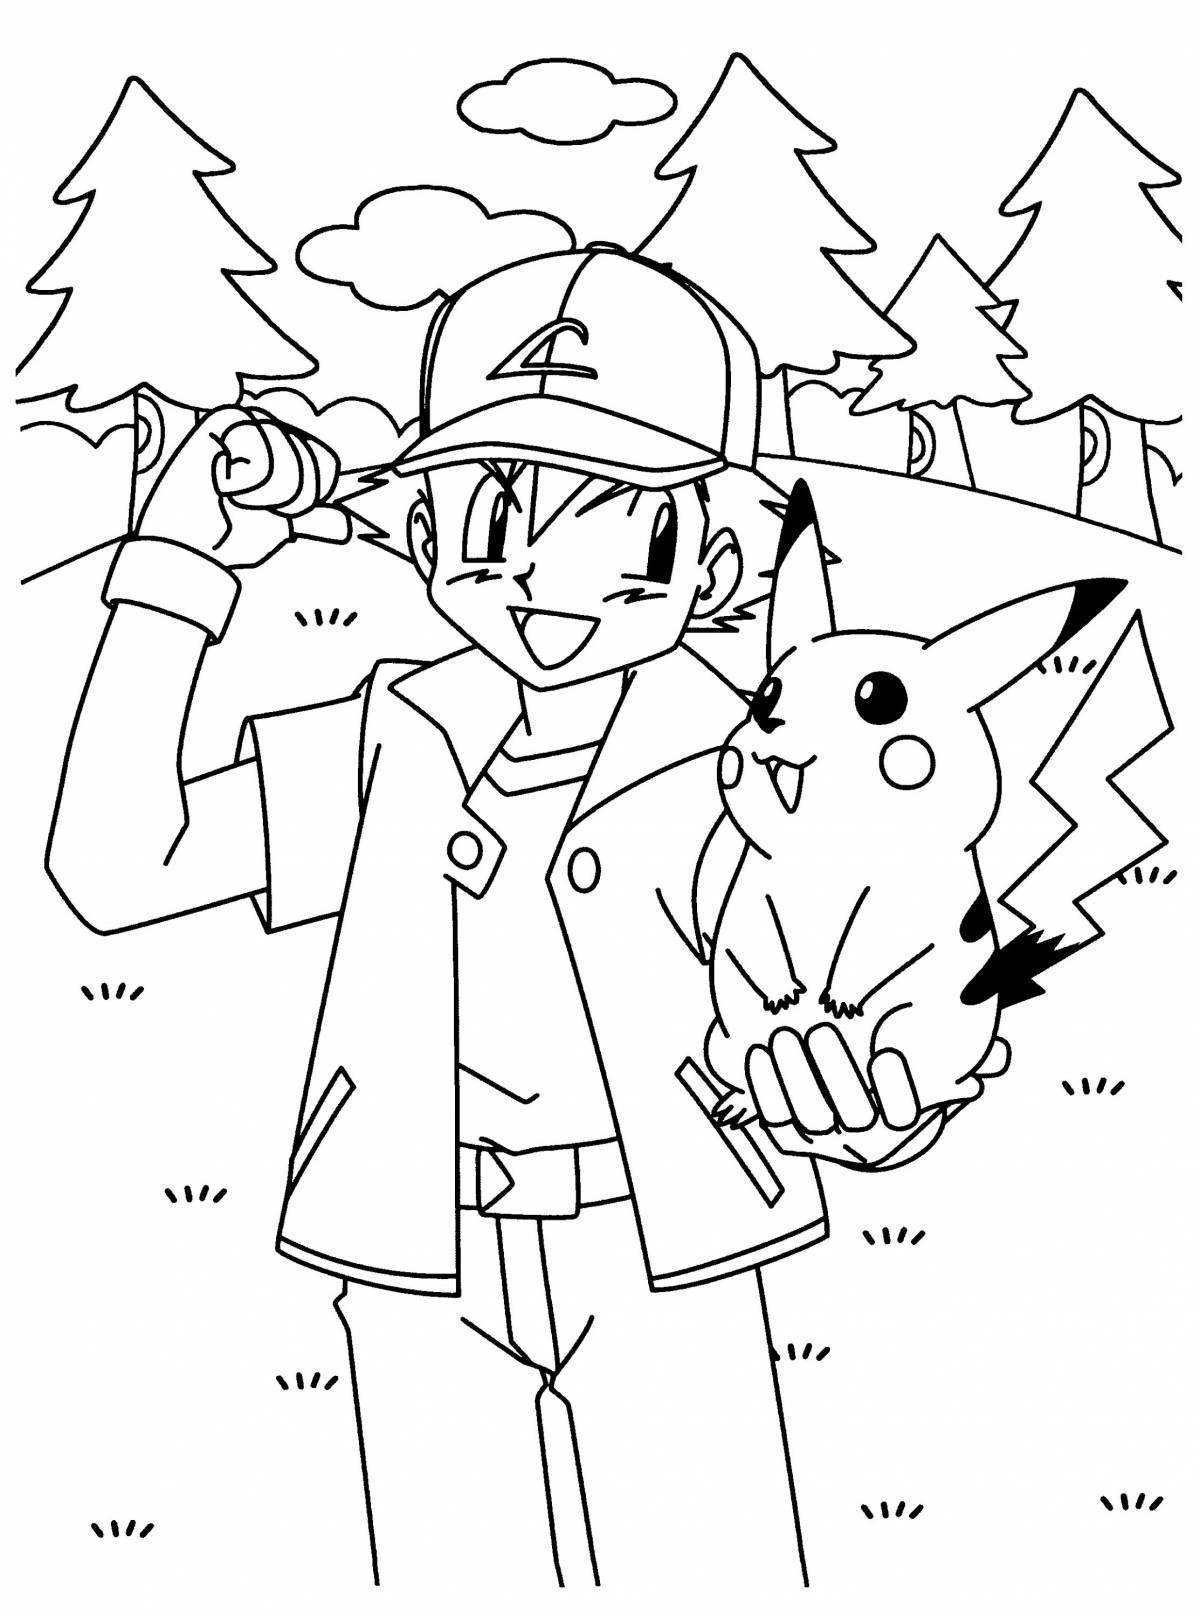 Glowing pikachu coloring page